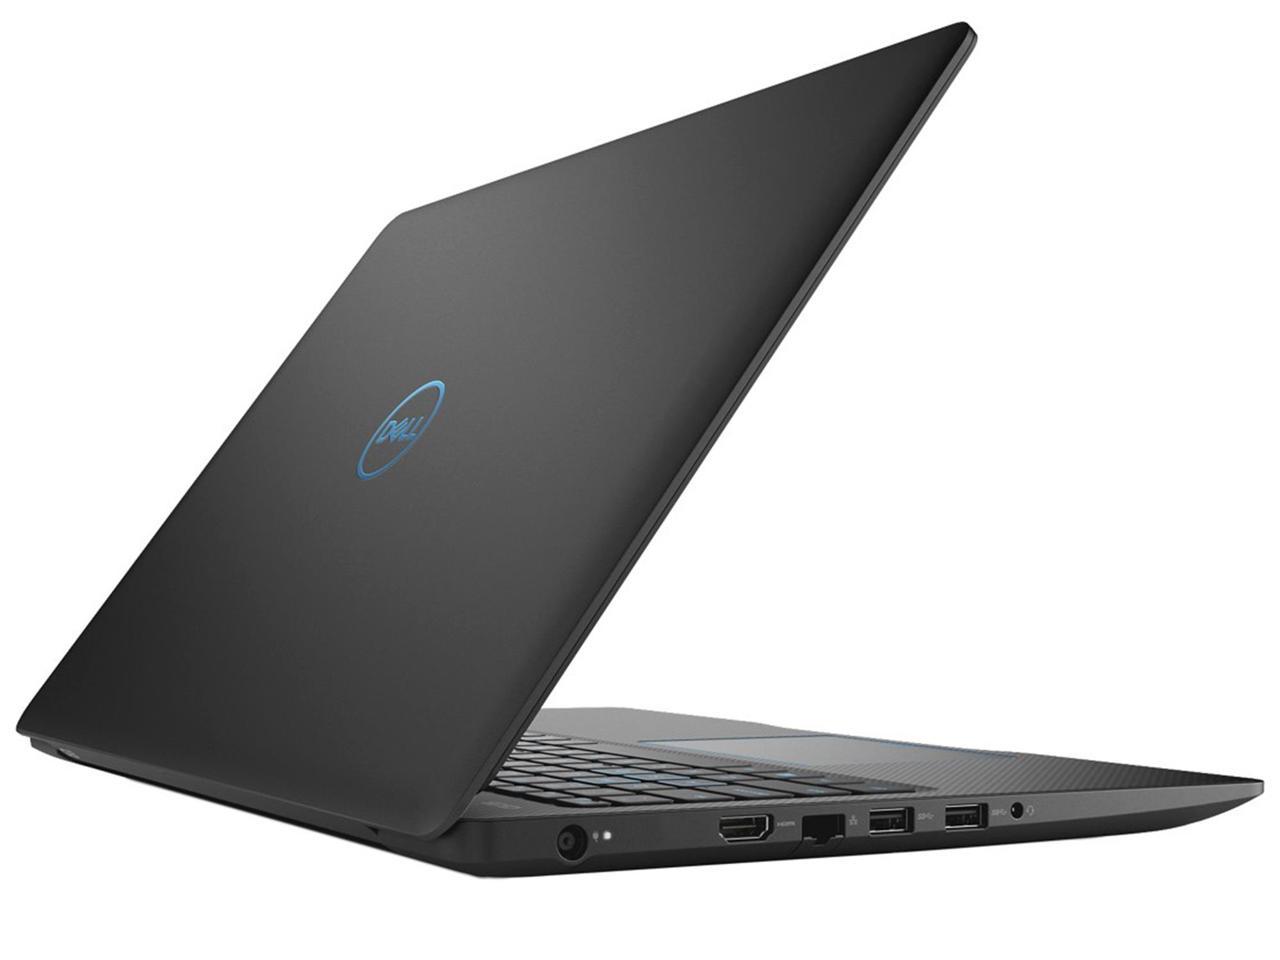 Dell G3 3779 Notebook, 17.3" FHD Display, Intel Core i58300H Upto 4.0 GHz, 8GB RAM, 1TB HDD